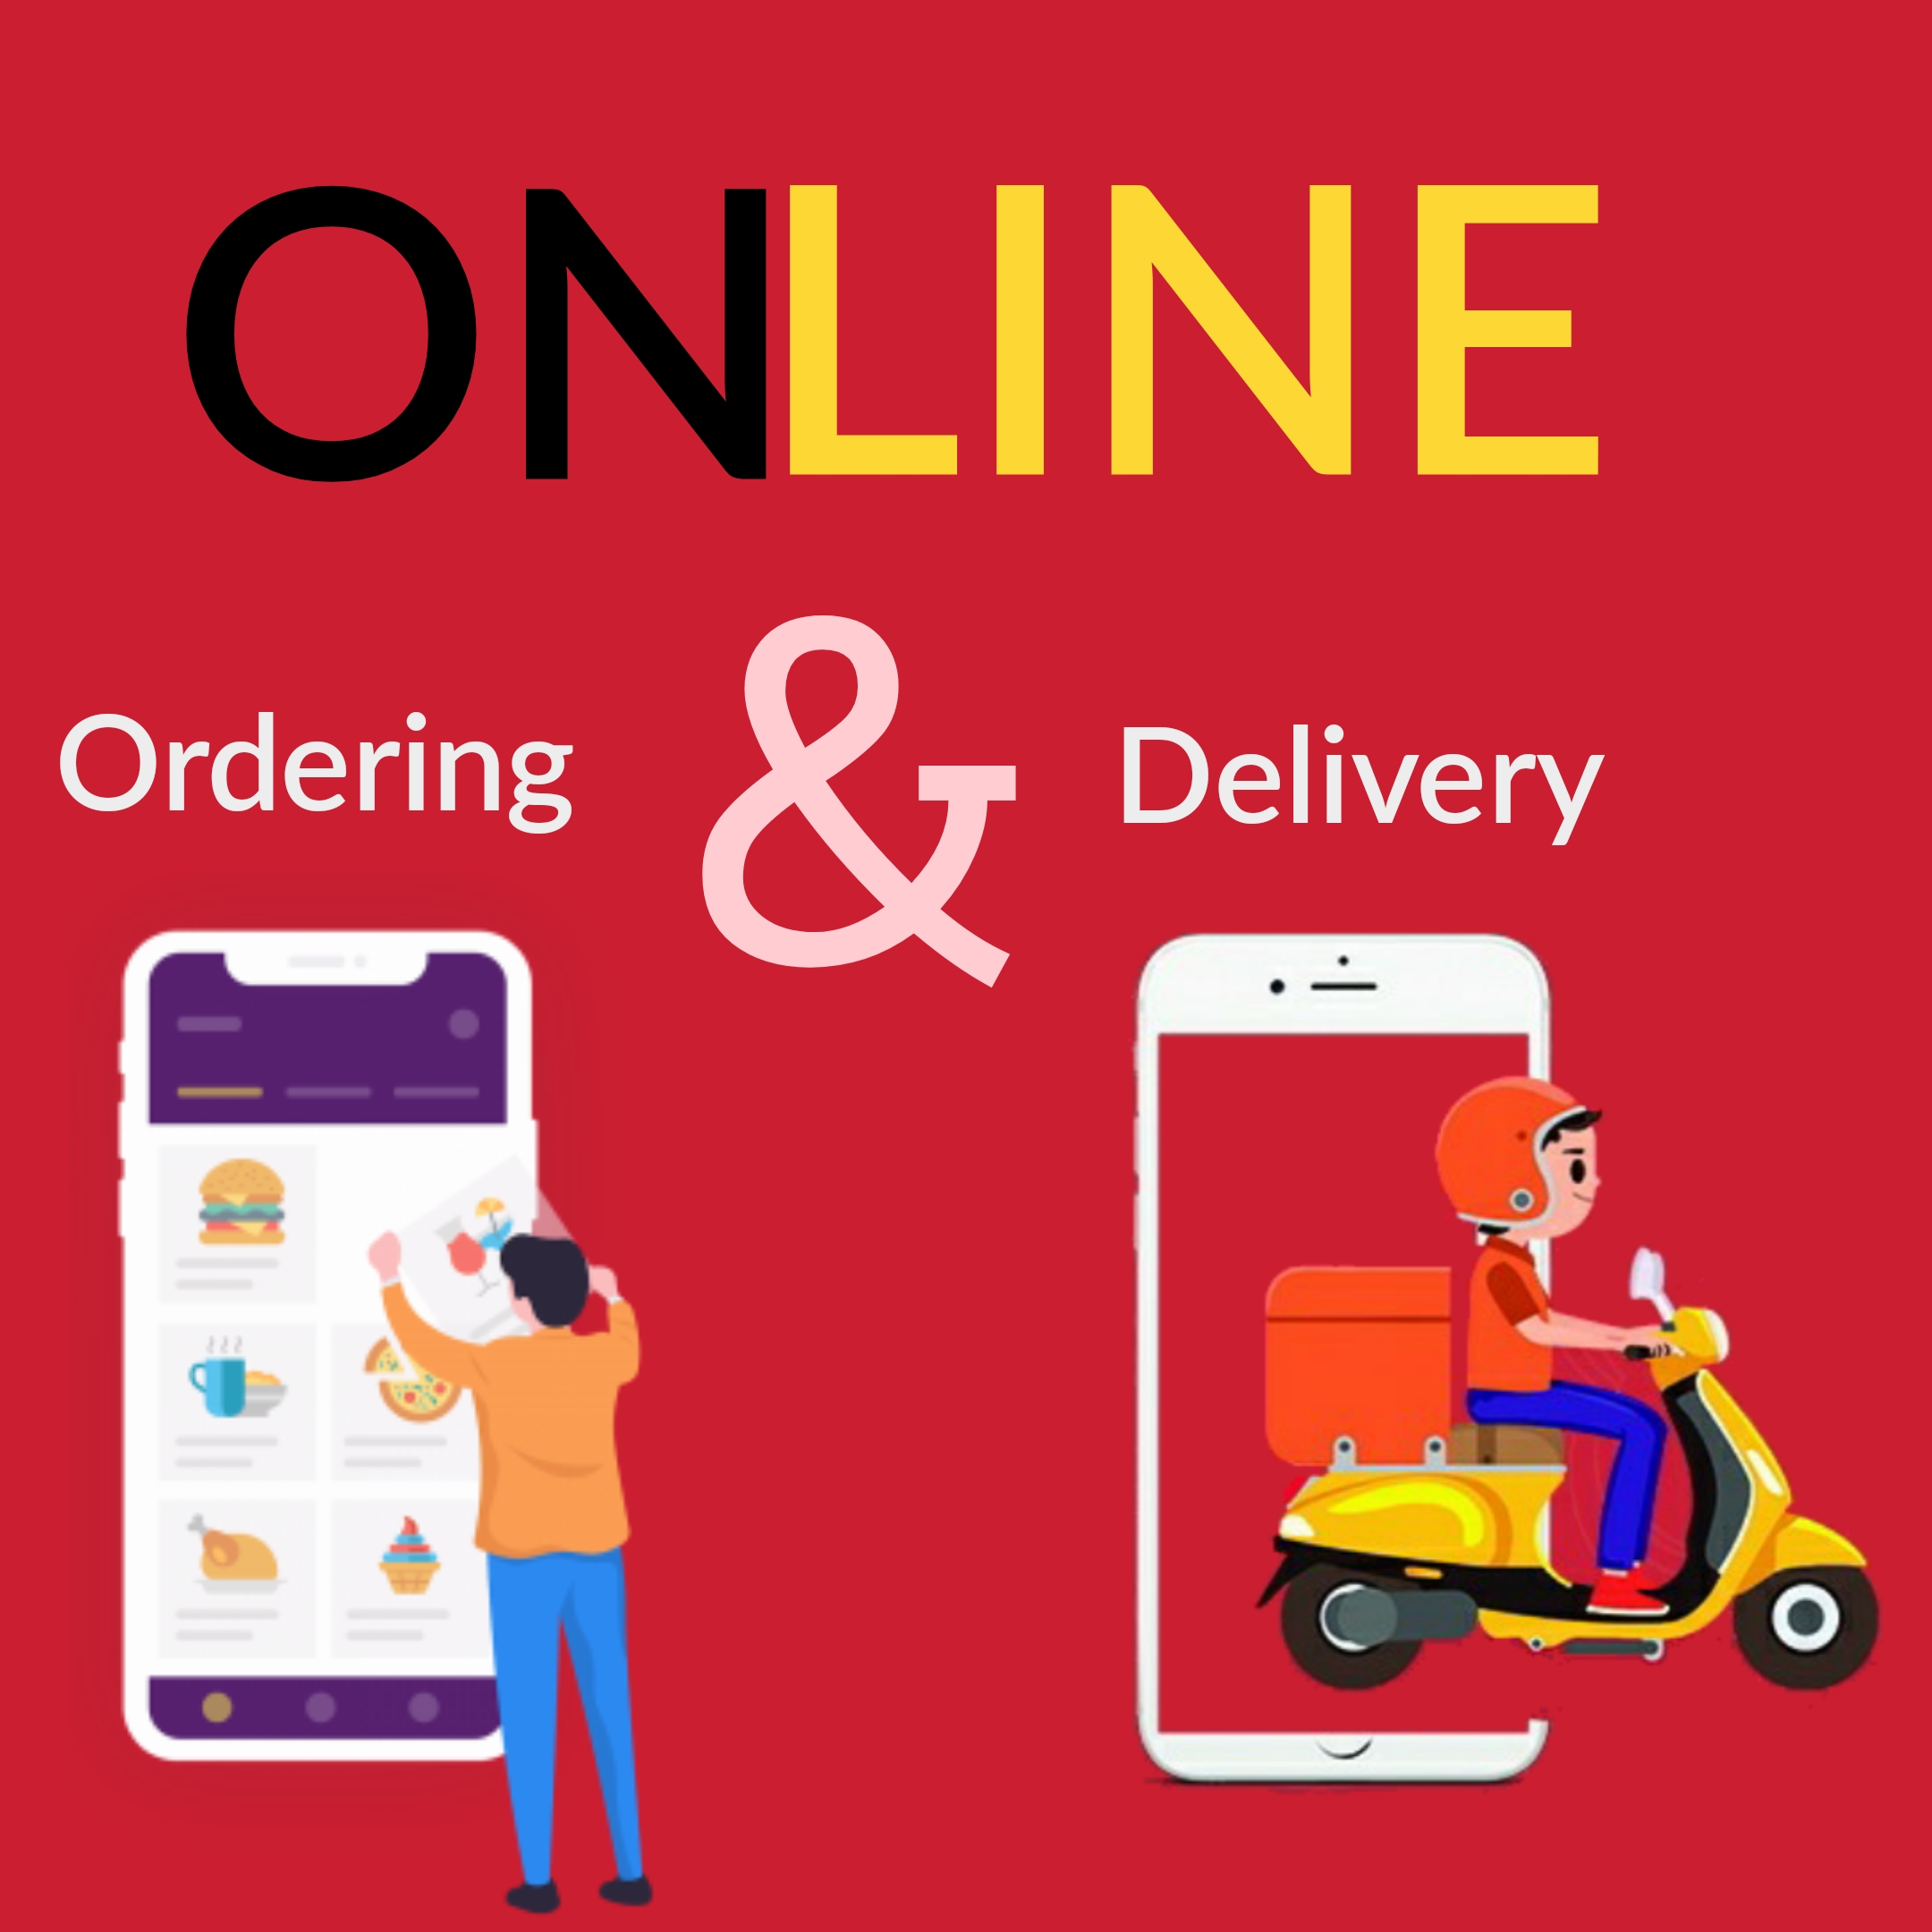 Food Ordering & Delivery Website (FREE Play Store App))